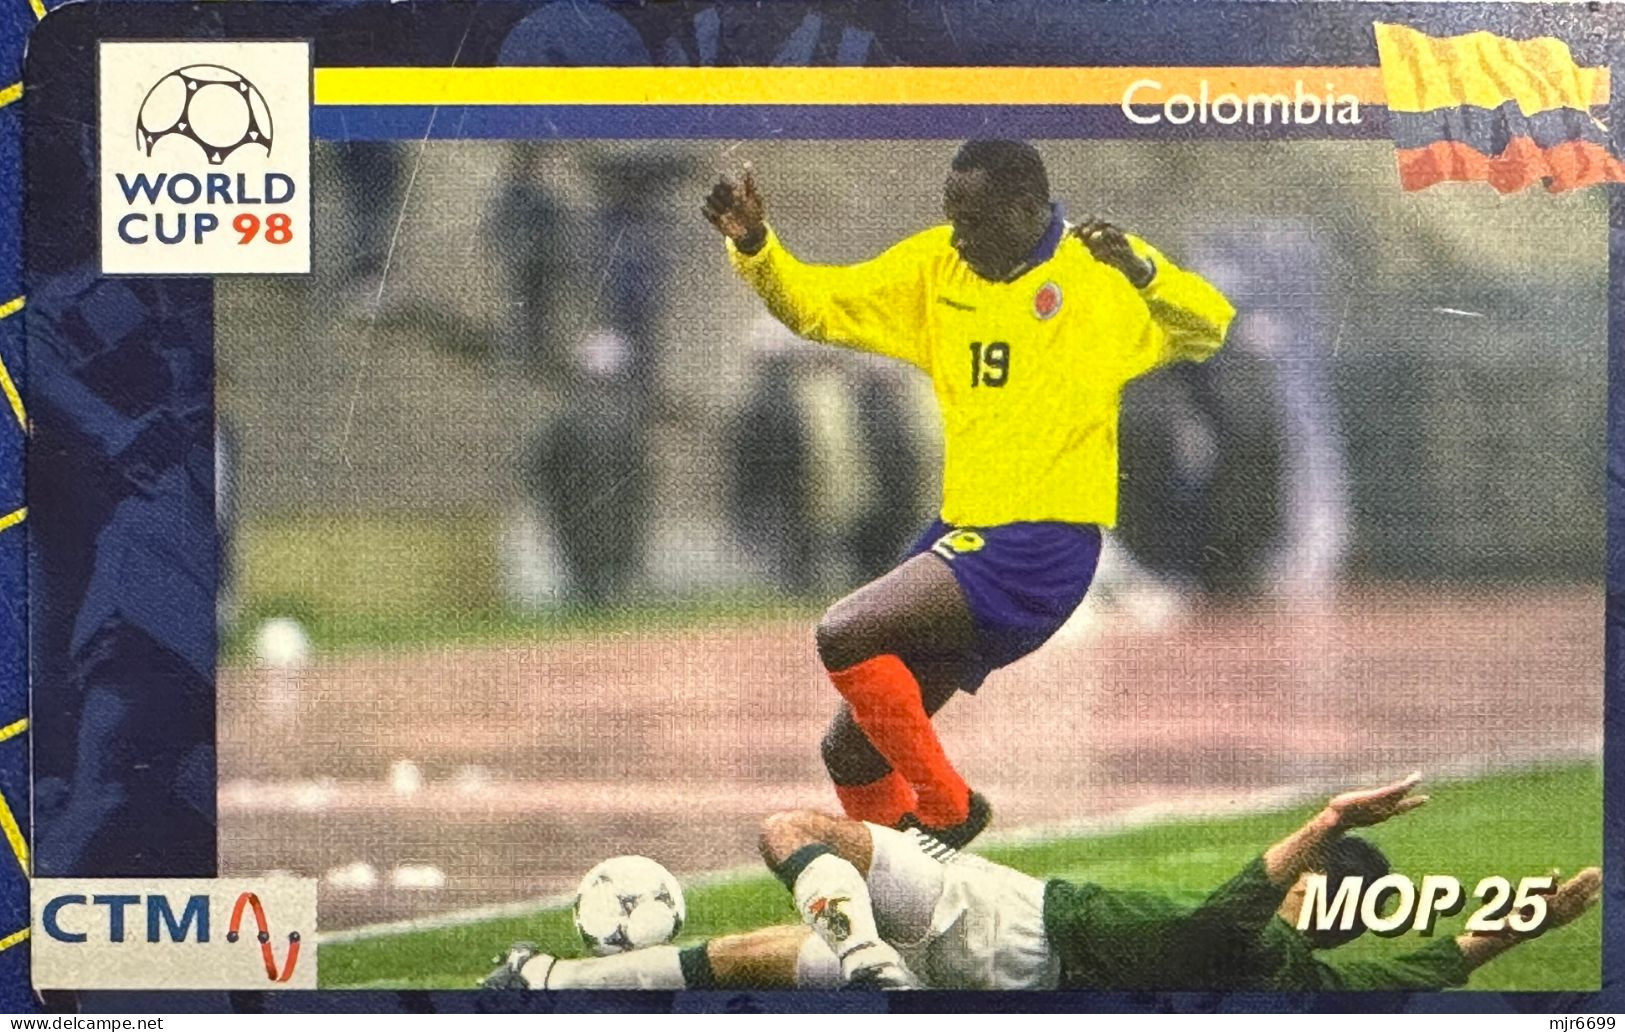 1998 WORLD CUP - COLOMBIA PHONE CARD, USED, VERY FINE AND CLEAN. - Macao